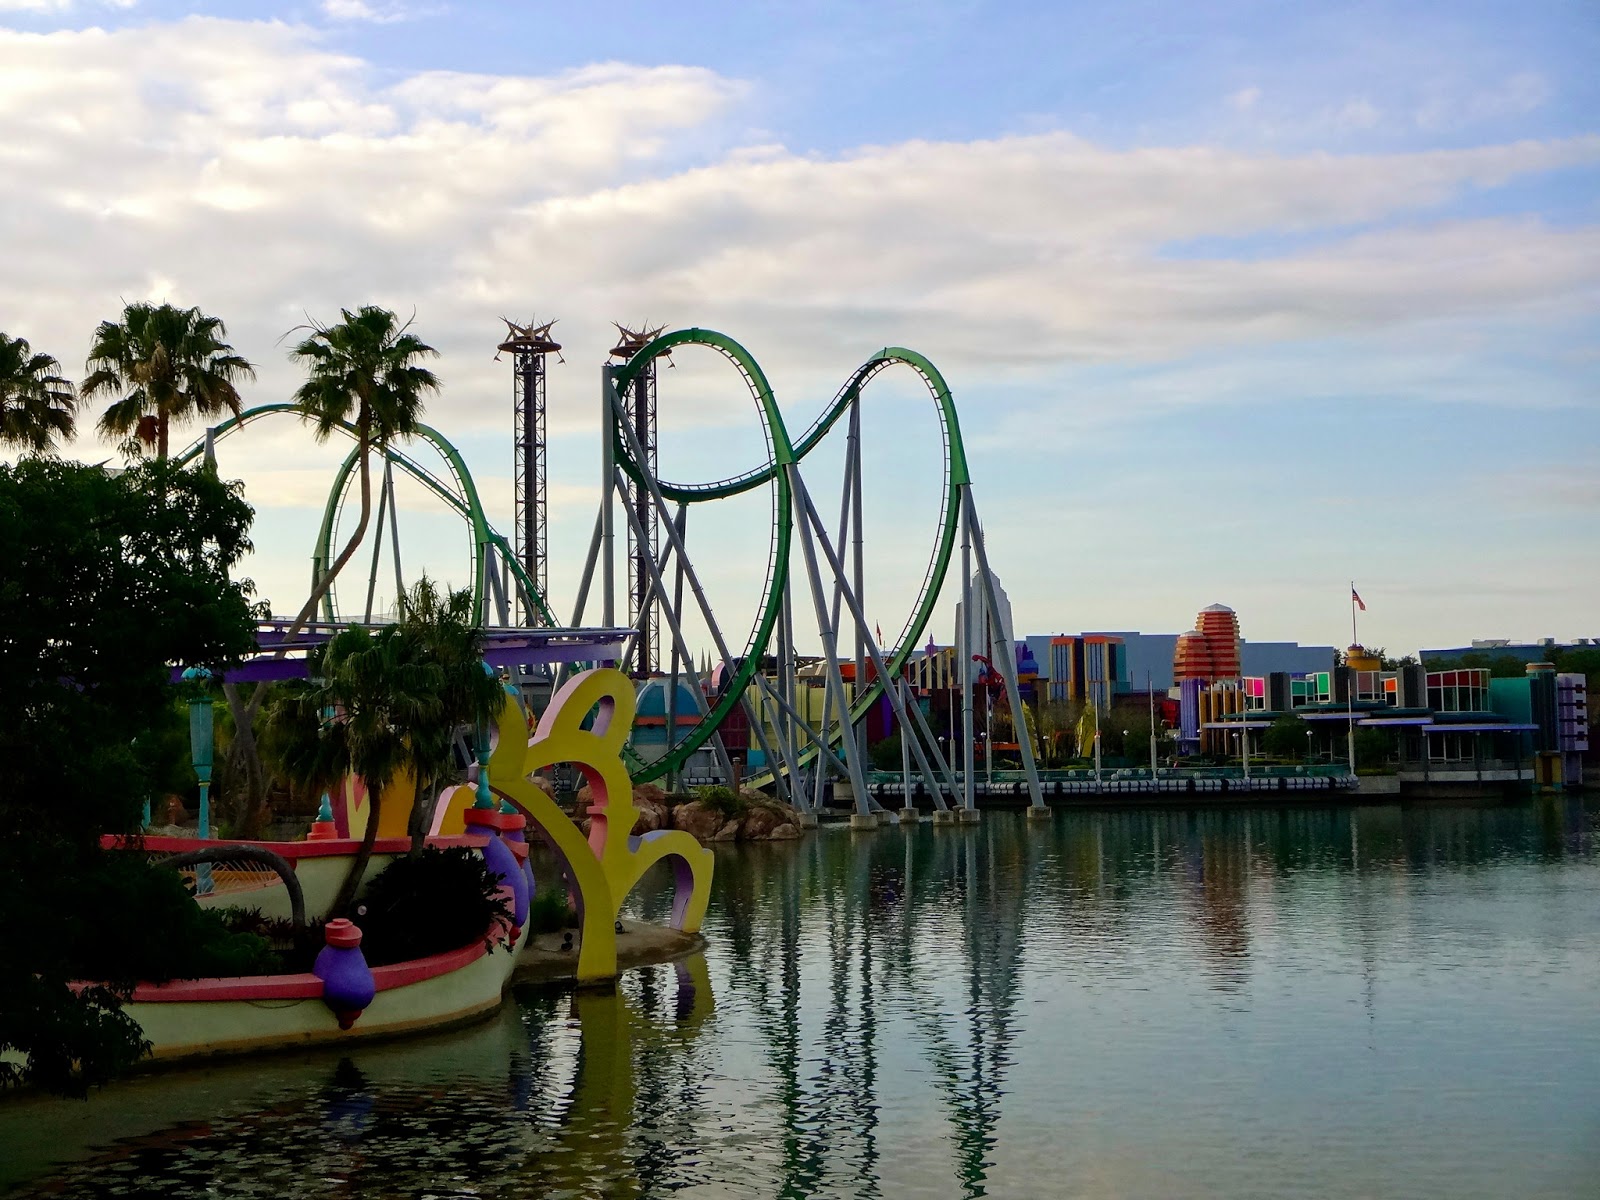 Orlando For Adults - The Best Things To Do Without Kids - The World of Deej